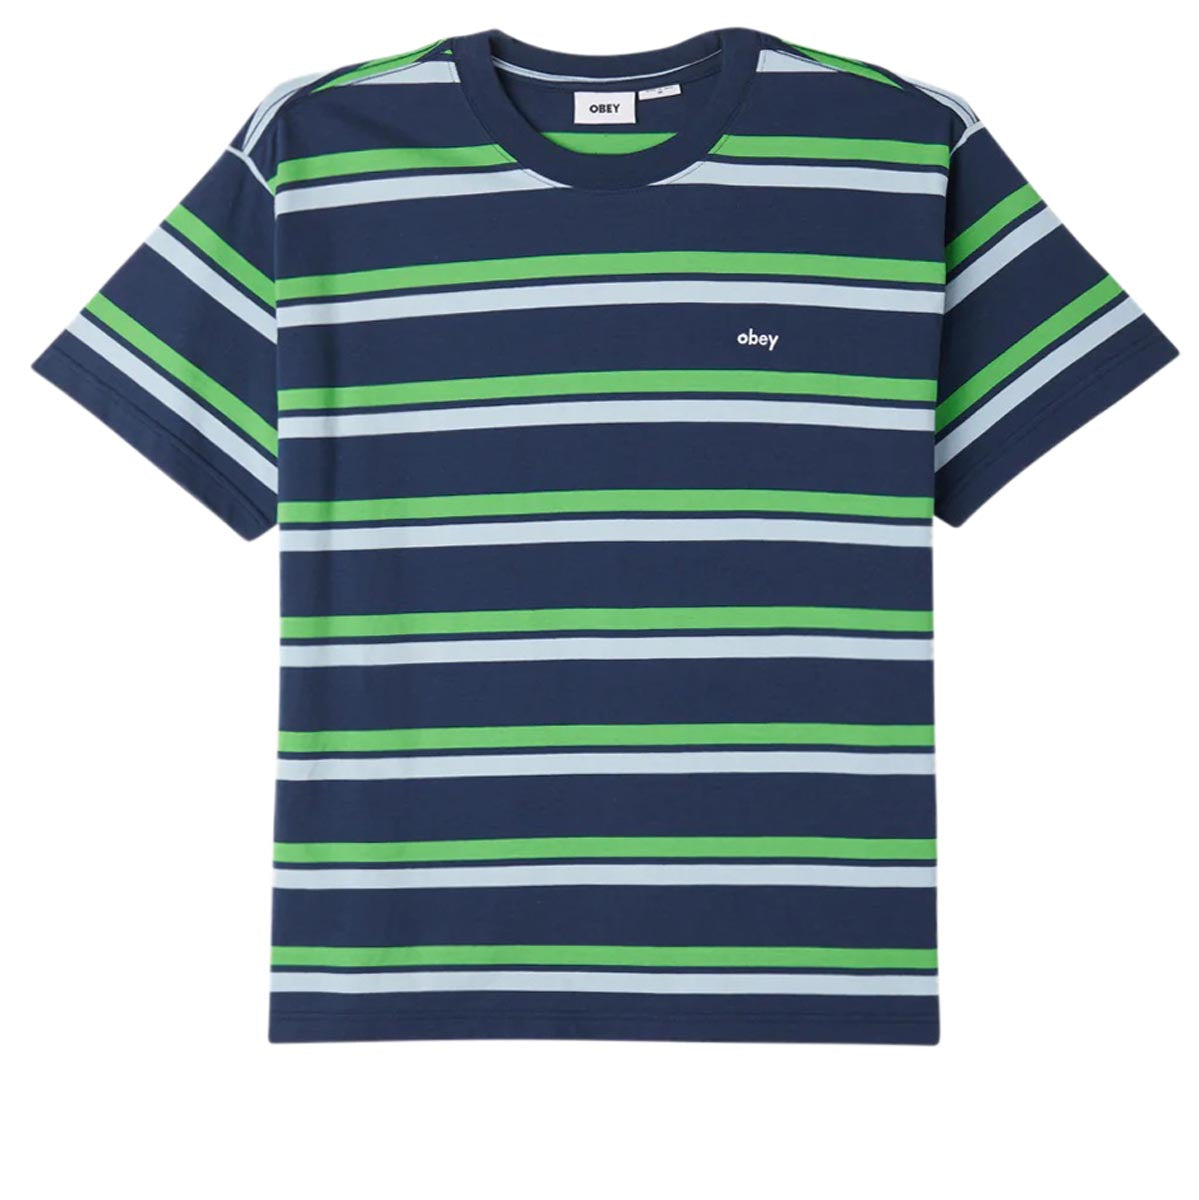 Obey Distance Stripe T-Shirt - Academy Navy image 1